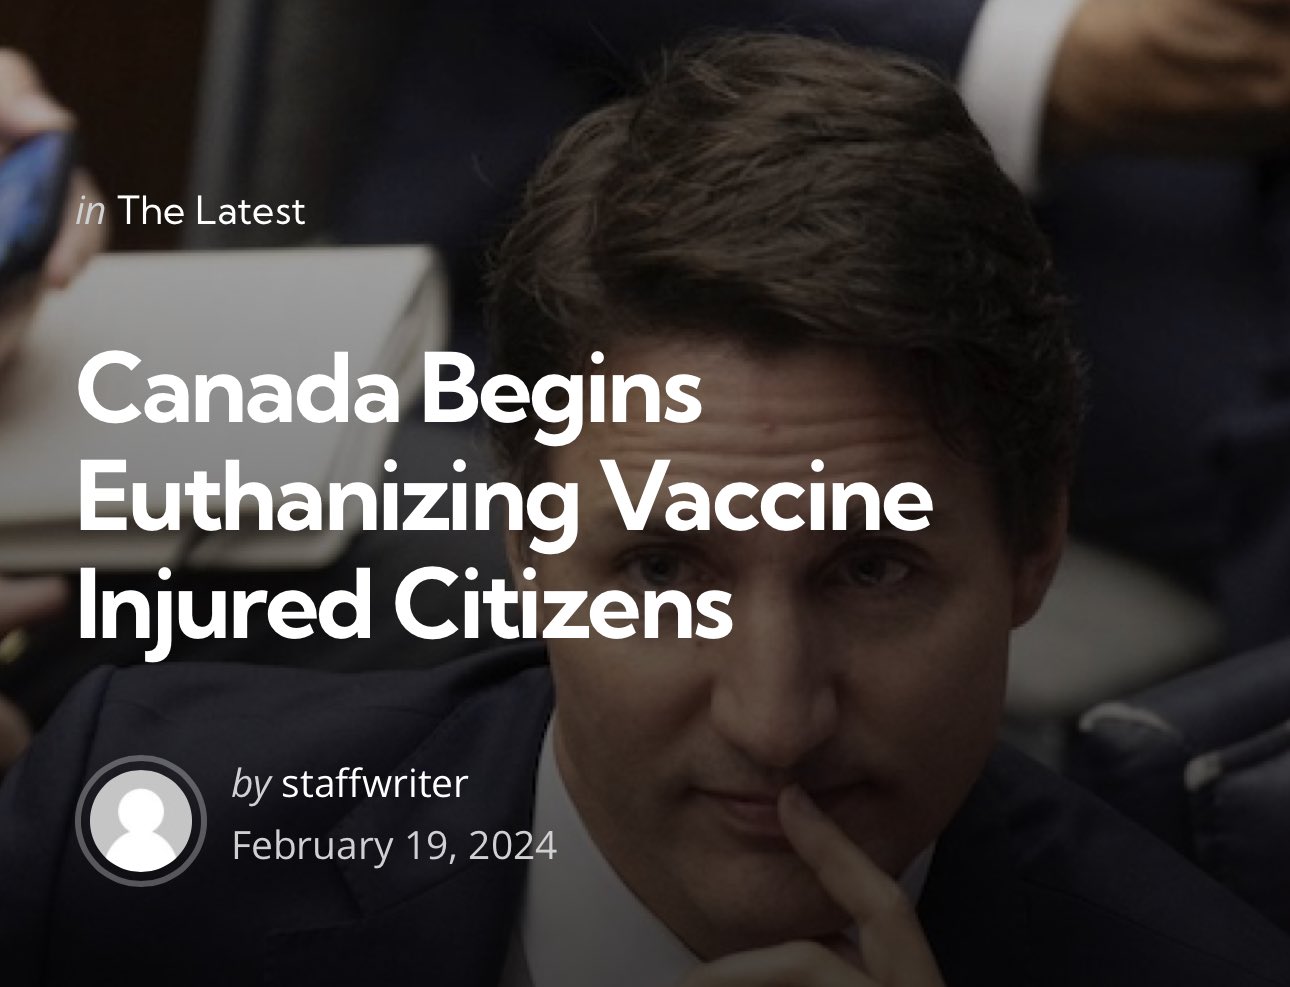 Canada begins to Euthanize Vaccine Injured Citizens